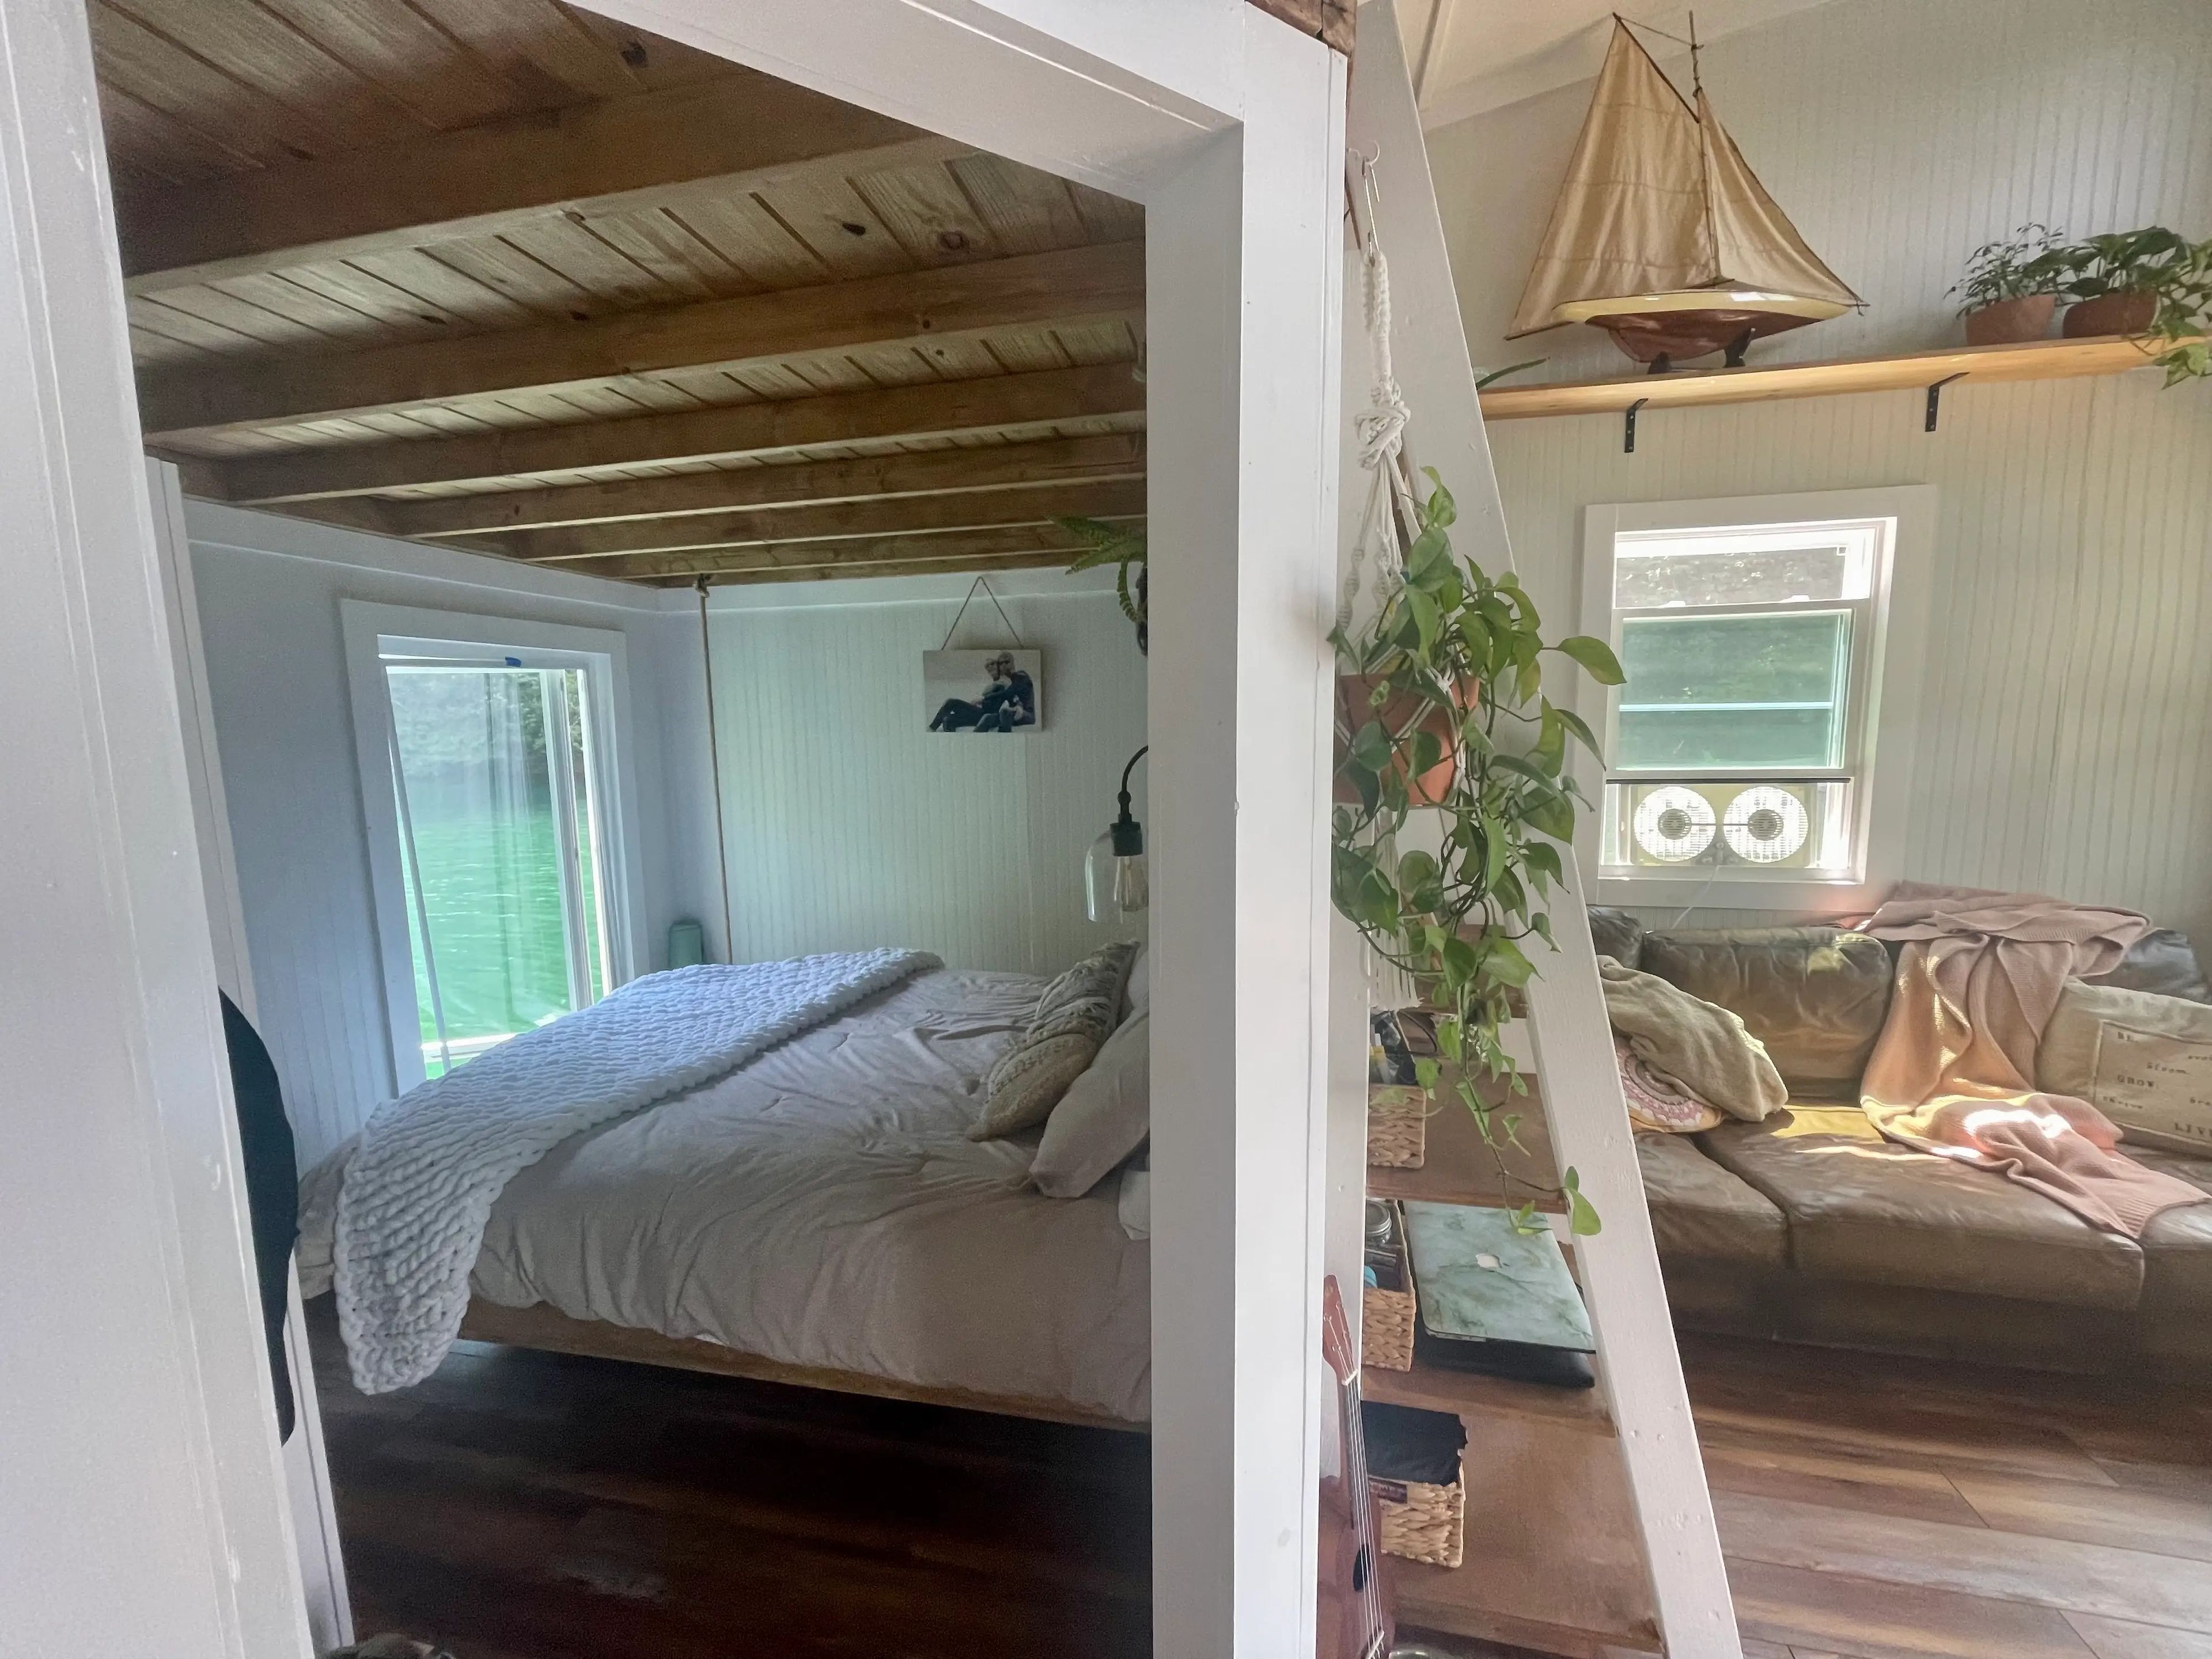 An overview of the bedroom and the living room of the floating house. Both rooms are separated by a partition wall.